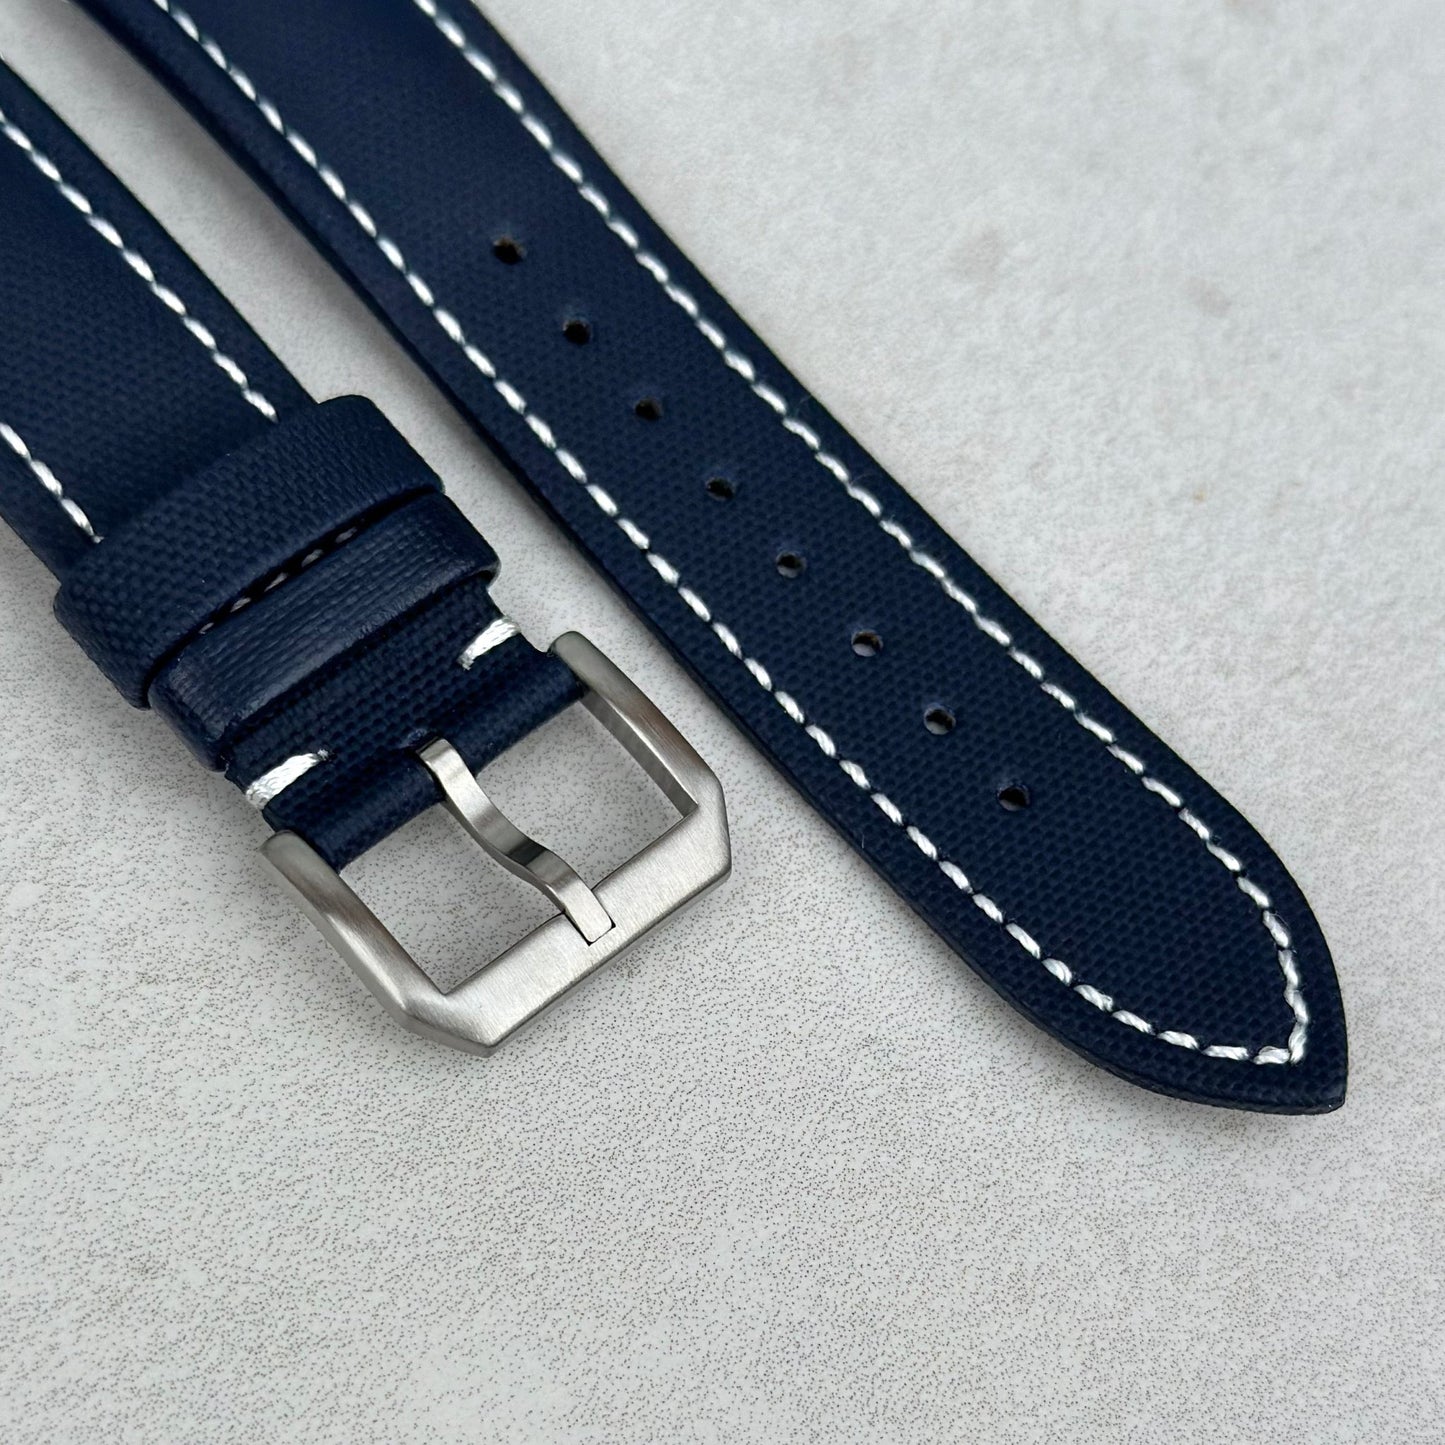 Brushed 316L stainless steel buckle on the navy blue sail cloth Apple Watch strap with white stitching. Watch And Strap